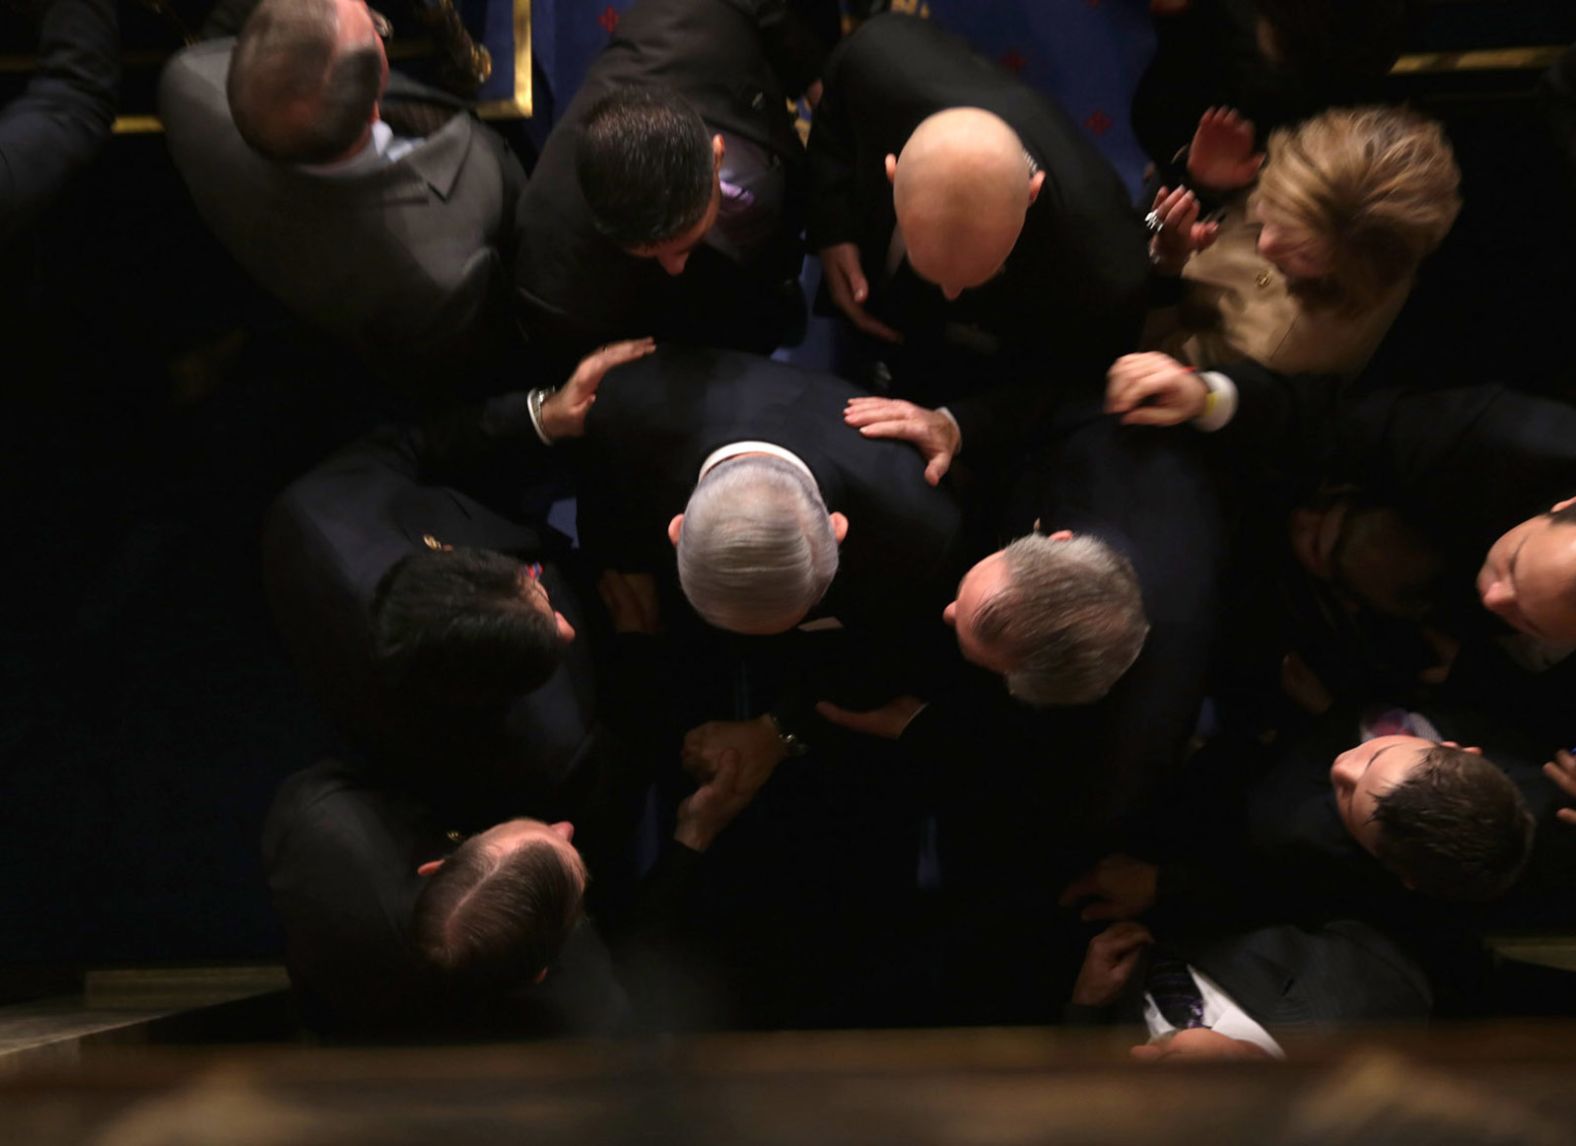 Netanyahu is greeted by members of US Congress as he arrives to speak in the House chamber in March 2015. He warned that a proposed agreement between world powers and Iran was "a bad deal" that would not stop Tehran from getting nuclear weapons.